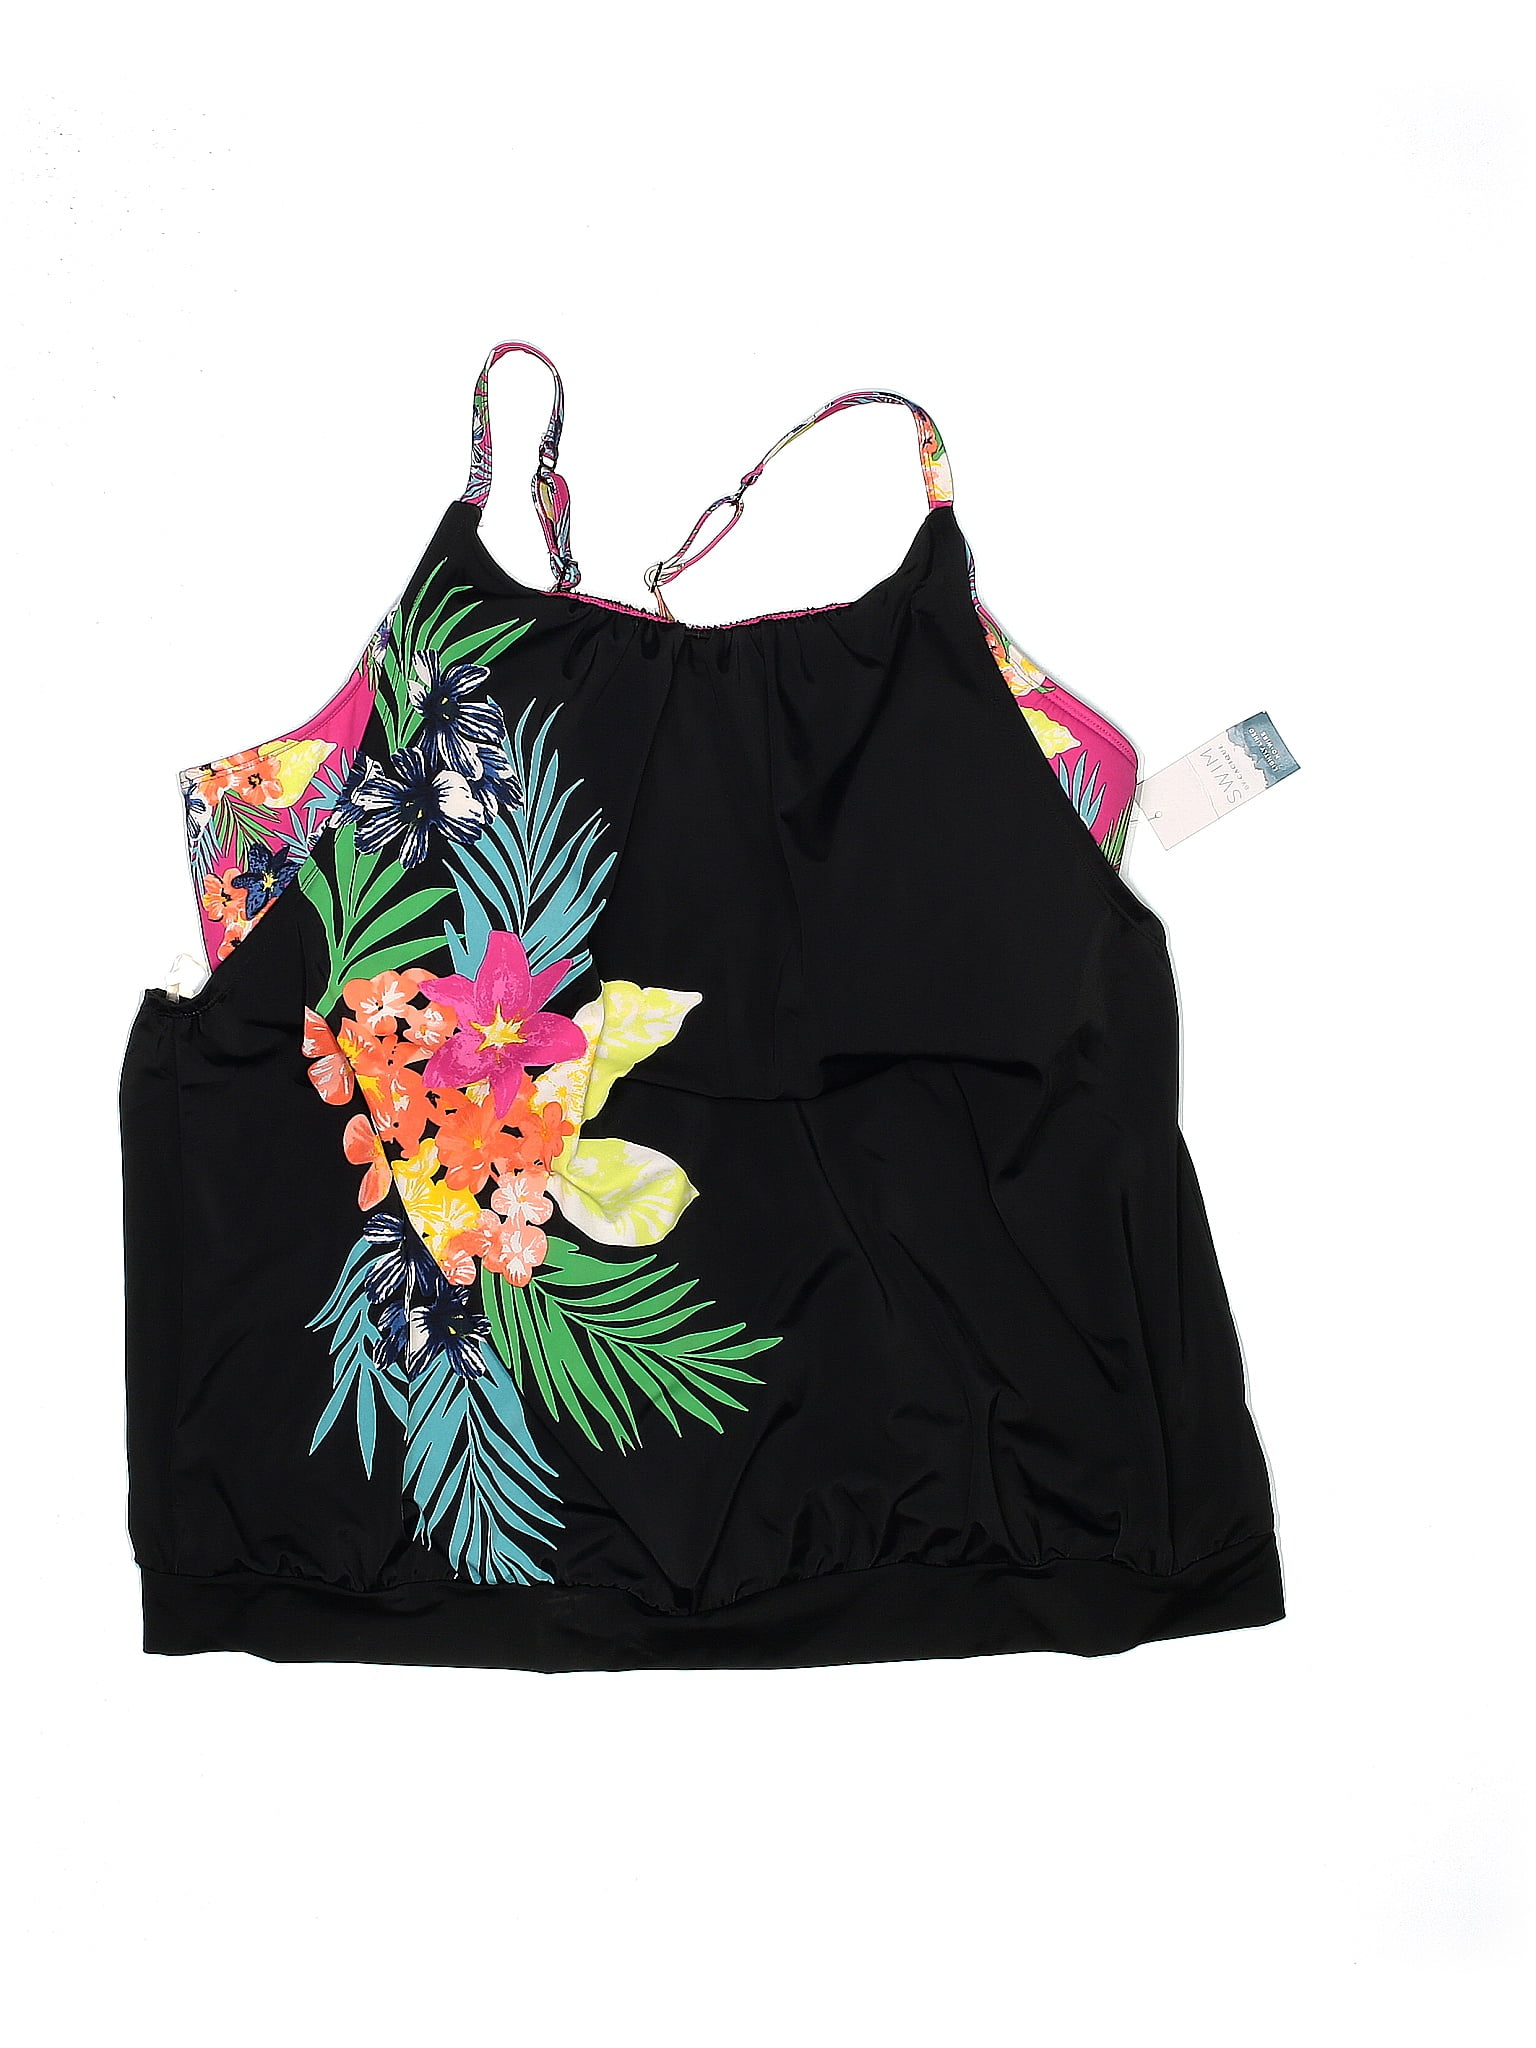 Swim by Cacique Women's Clothing On Sale Up To 90% Off Retail